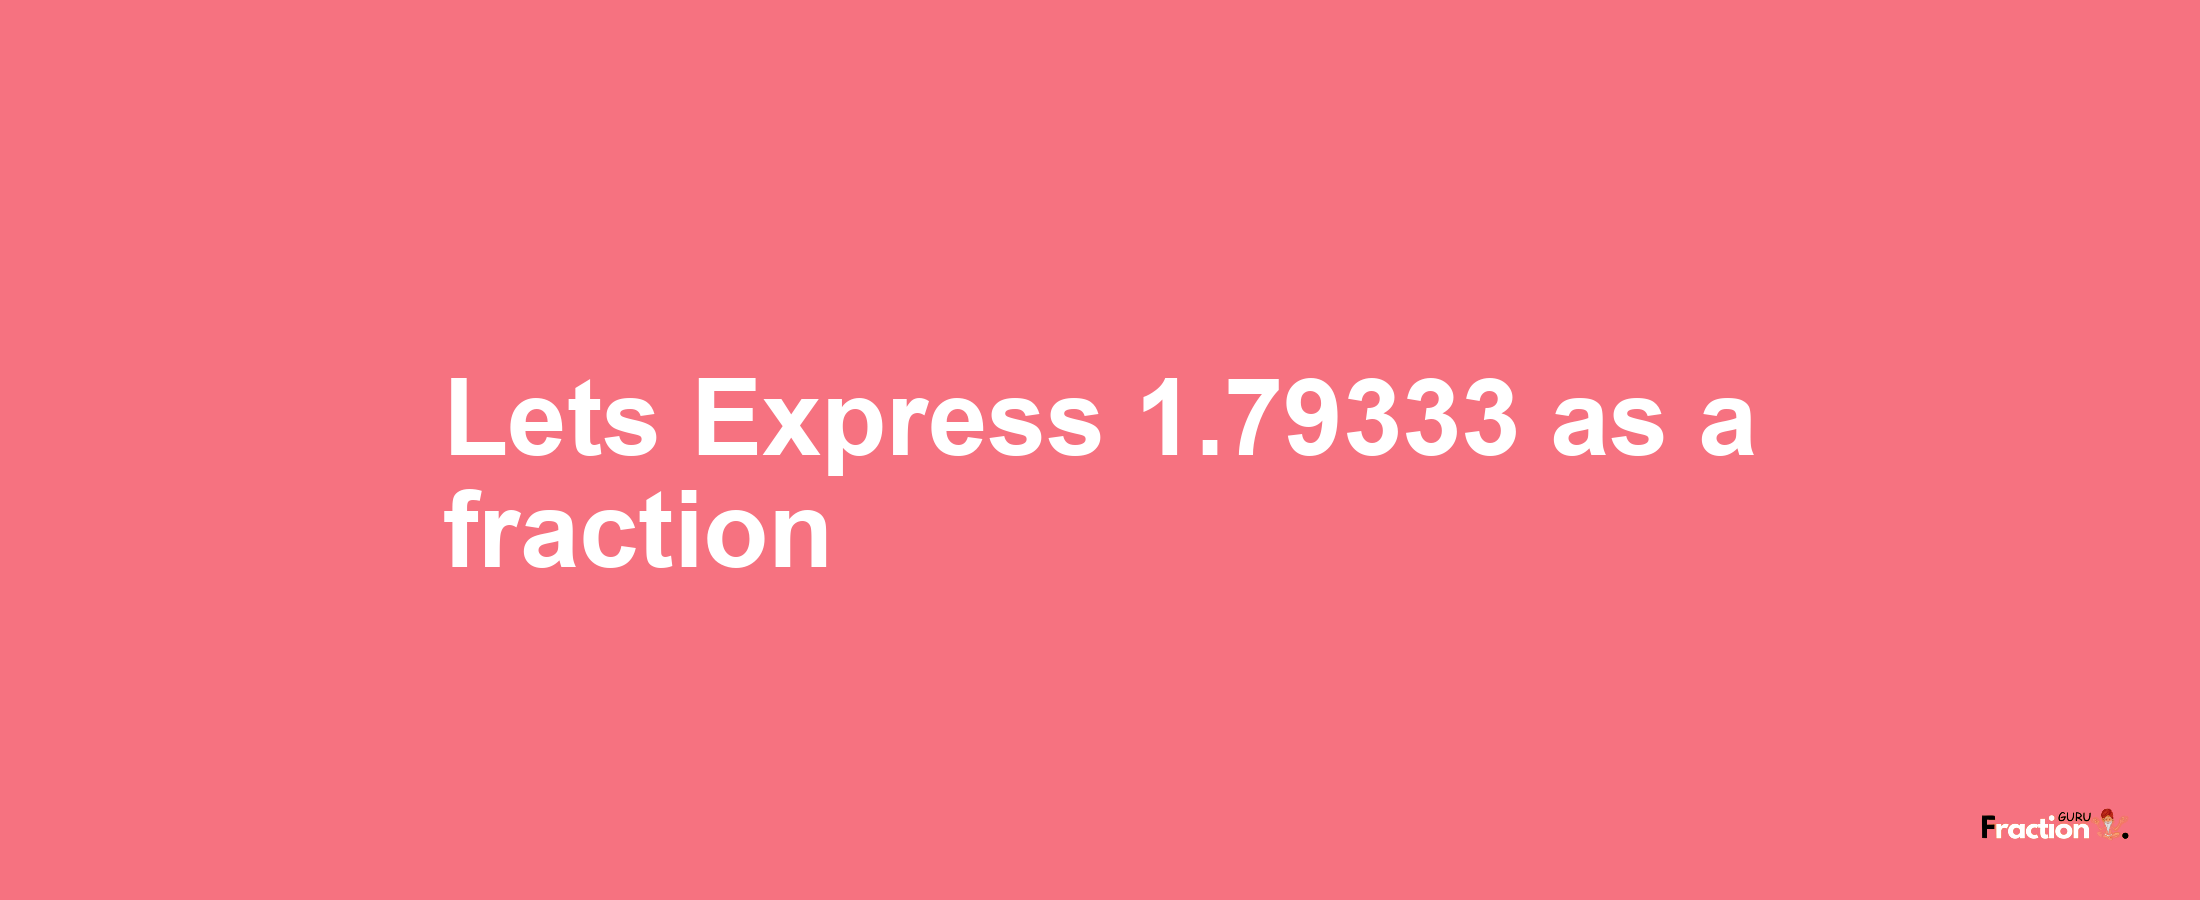 Lets Express 1.79333 as afraction